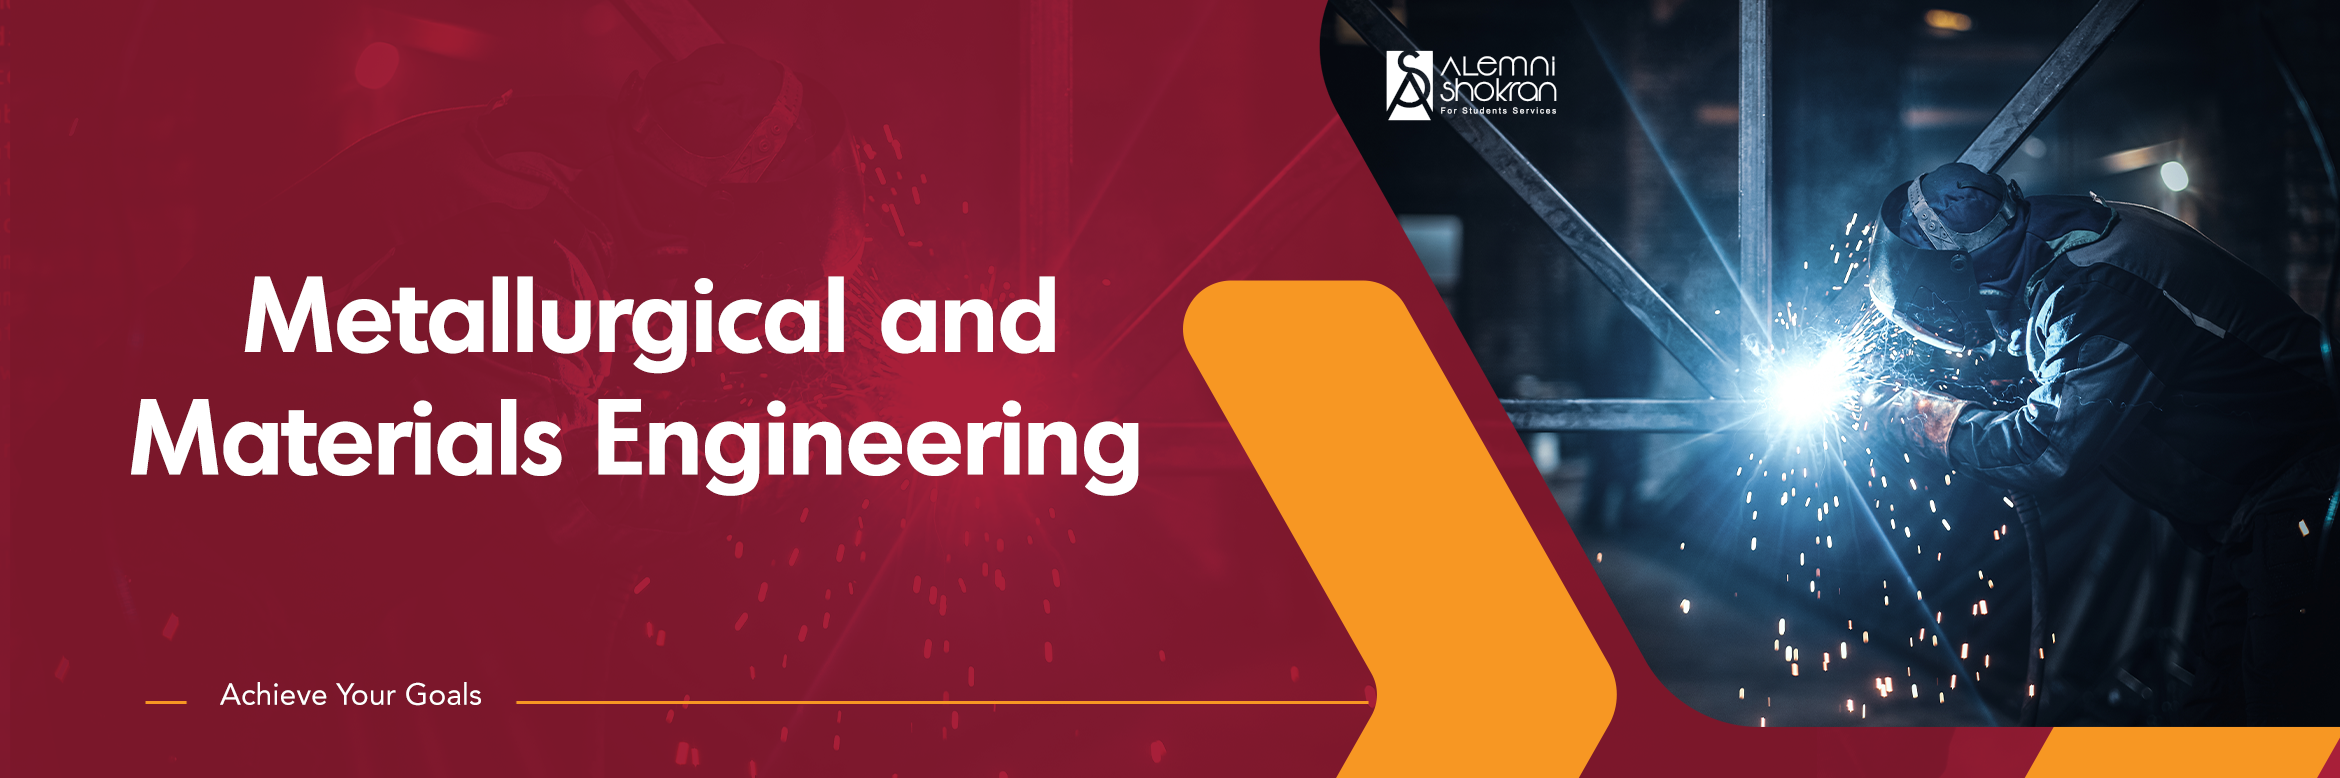 Metallurgical-and-Materials-Engineering